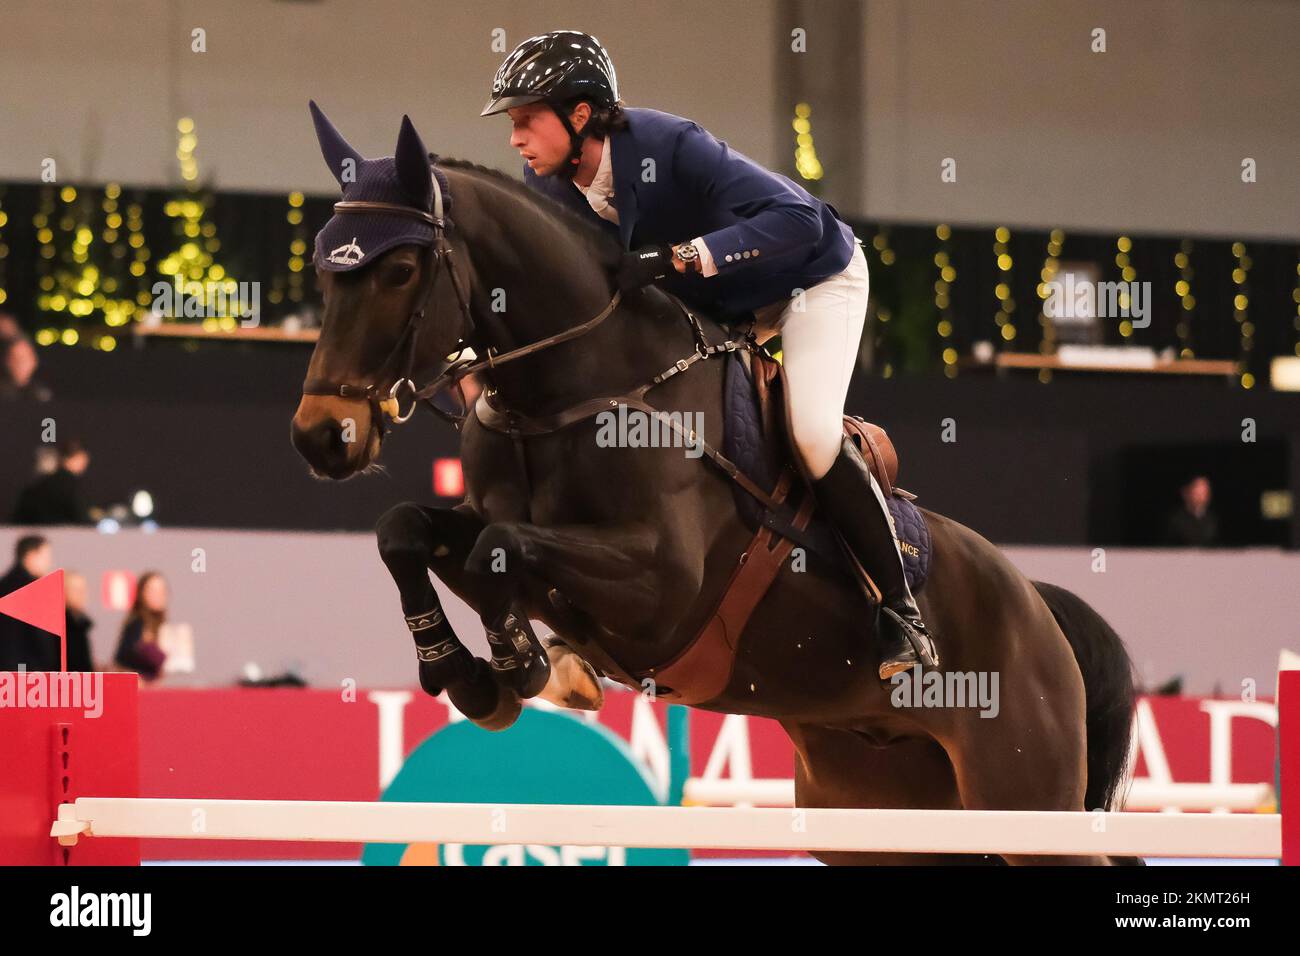 Madrid, Spain. 26th Nov, 2022. Horse rider Martin Fuchs competes during the 'CSI5 Trofeo Estrella Damm' event during the IFEMA Madrid Horse week 2022 at the Main Arena in Ifema, Madrid. IFEMA Madrid Horse week is a multidisciplinary equestrian event which involves competitions and show programs. This holiday of horses and riders is held annually from November 25th to 27th and this year they celebrate their 10th anniversary. IFEMA is short for Institución Ferial de Madrid or 'Fair Institution of Madrid' Credit: SOPA Images Limited/Alamy Live News Stock Photo